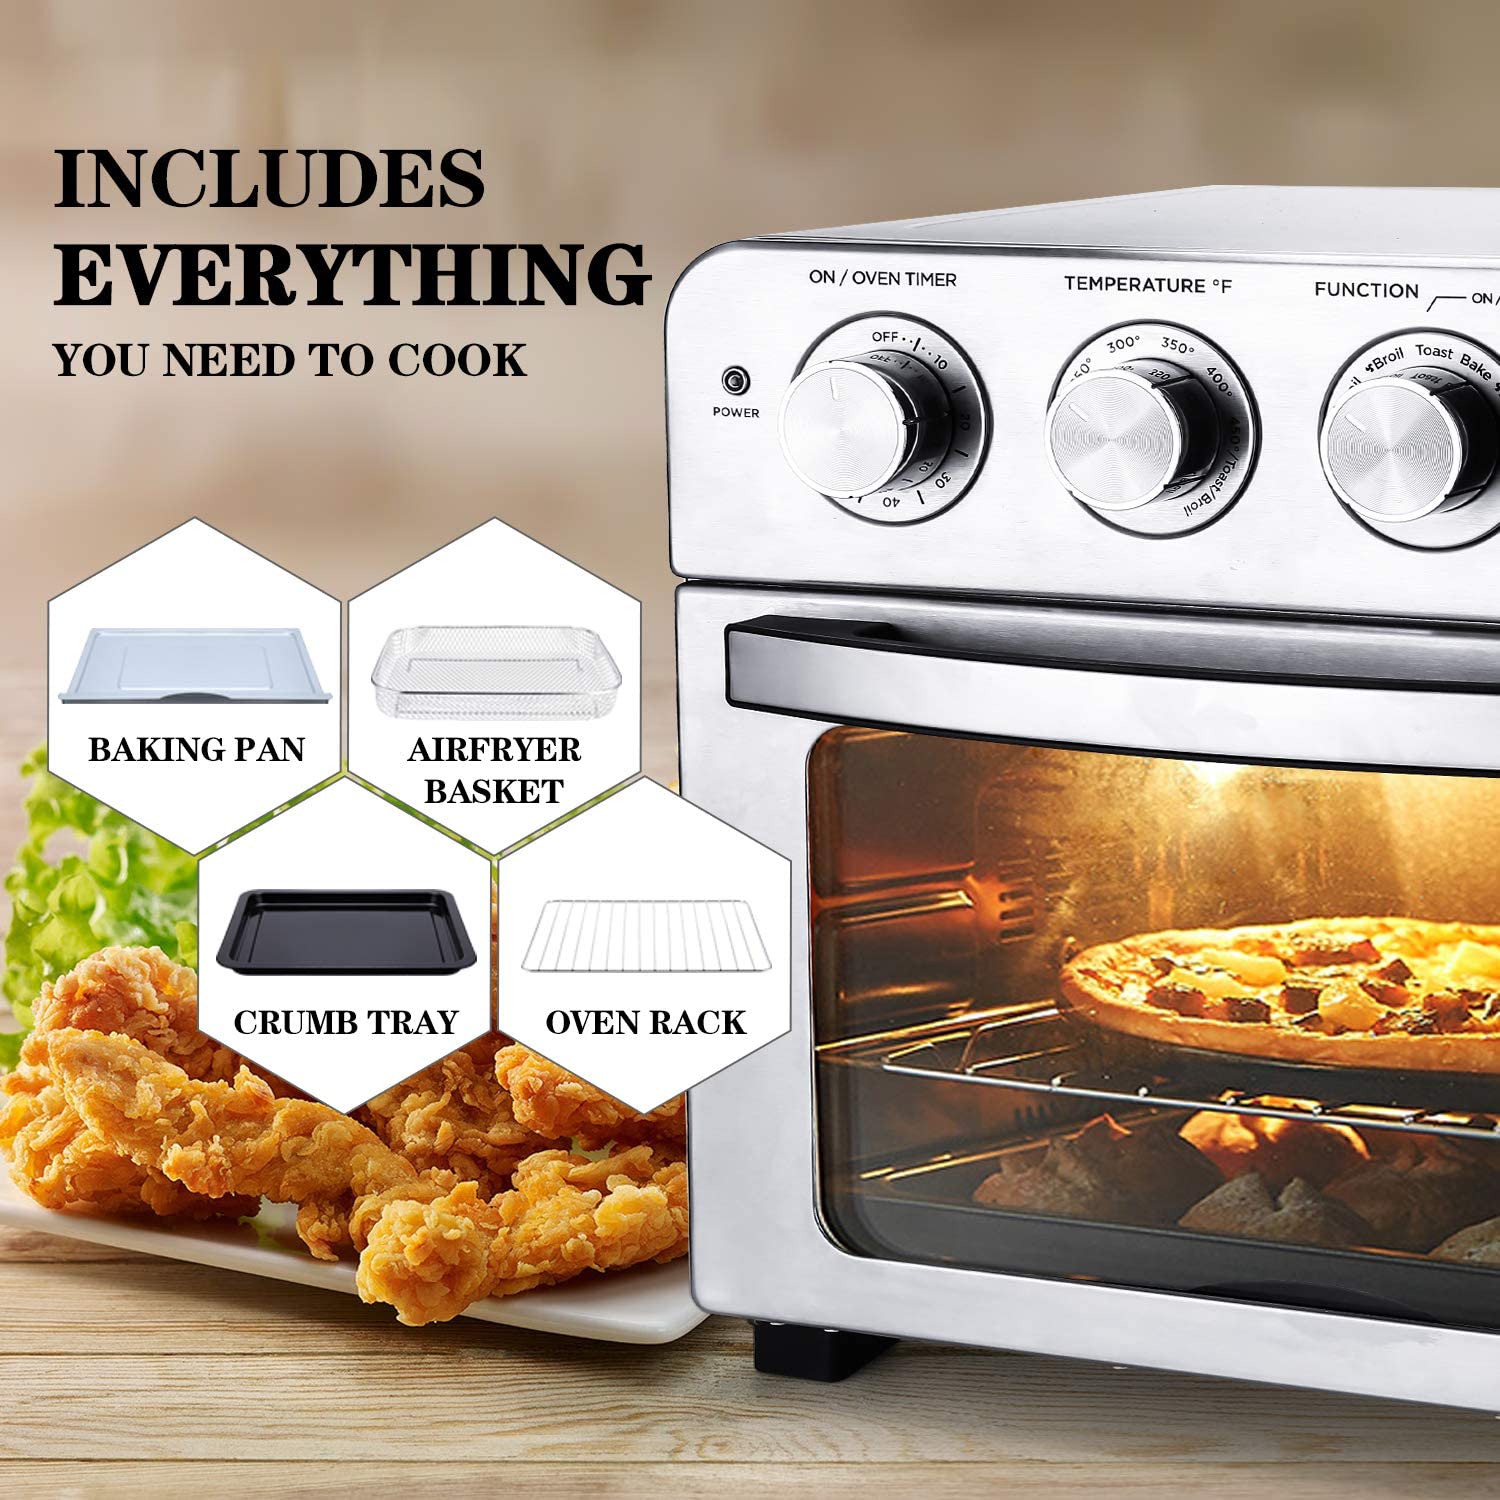 Air Fryer Toaster Oven,24QT Convection Airfryer Countertop Oven,   Fry Oil-Free, Cooking Accessories Included